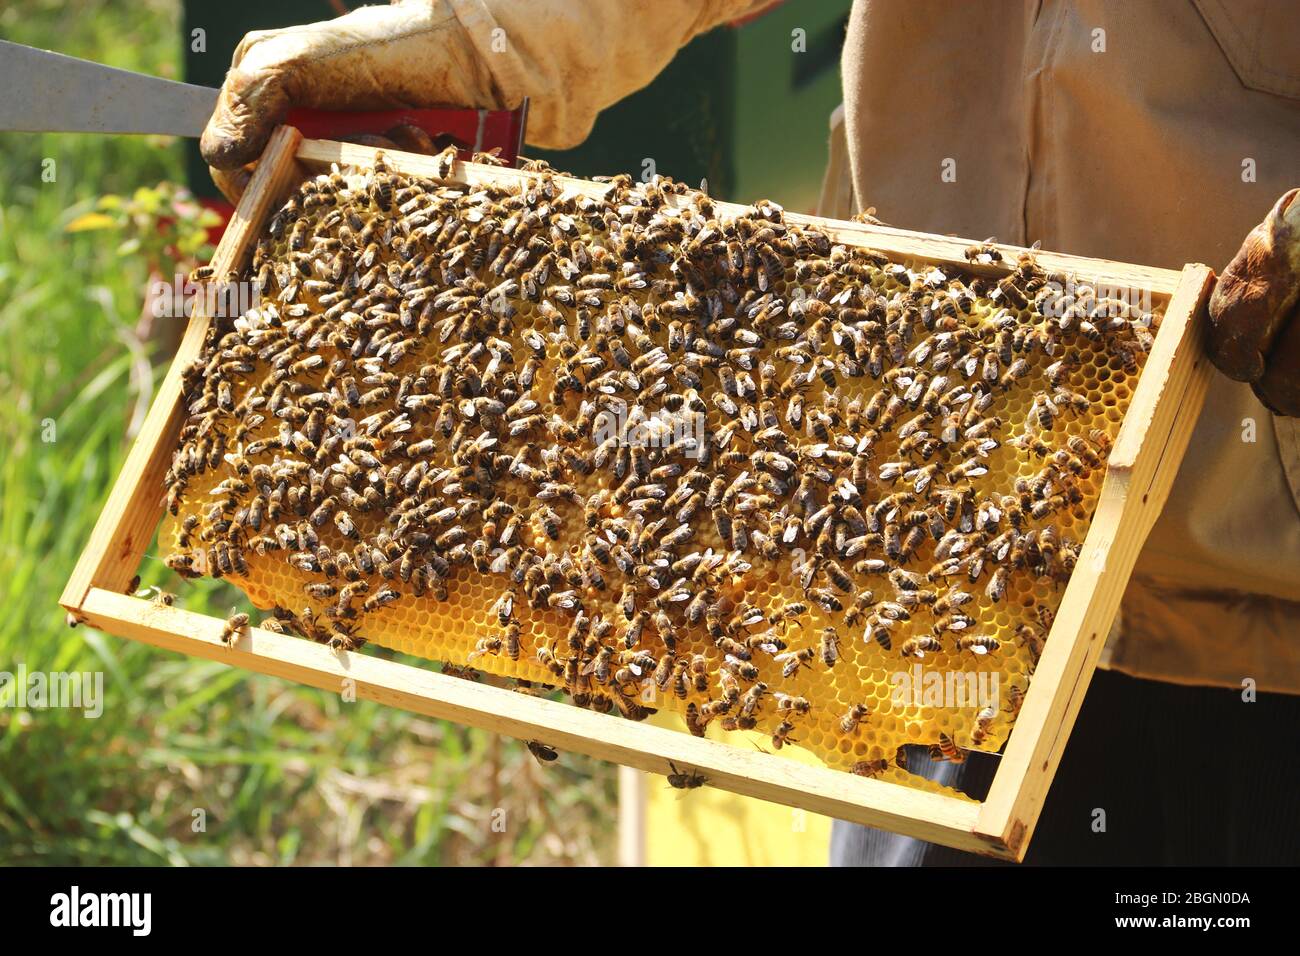 close-up of a honeycomb covered with bees which is held by a beekeeper Stock Photo